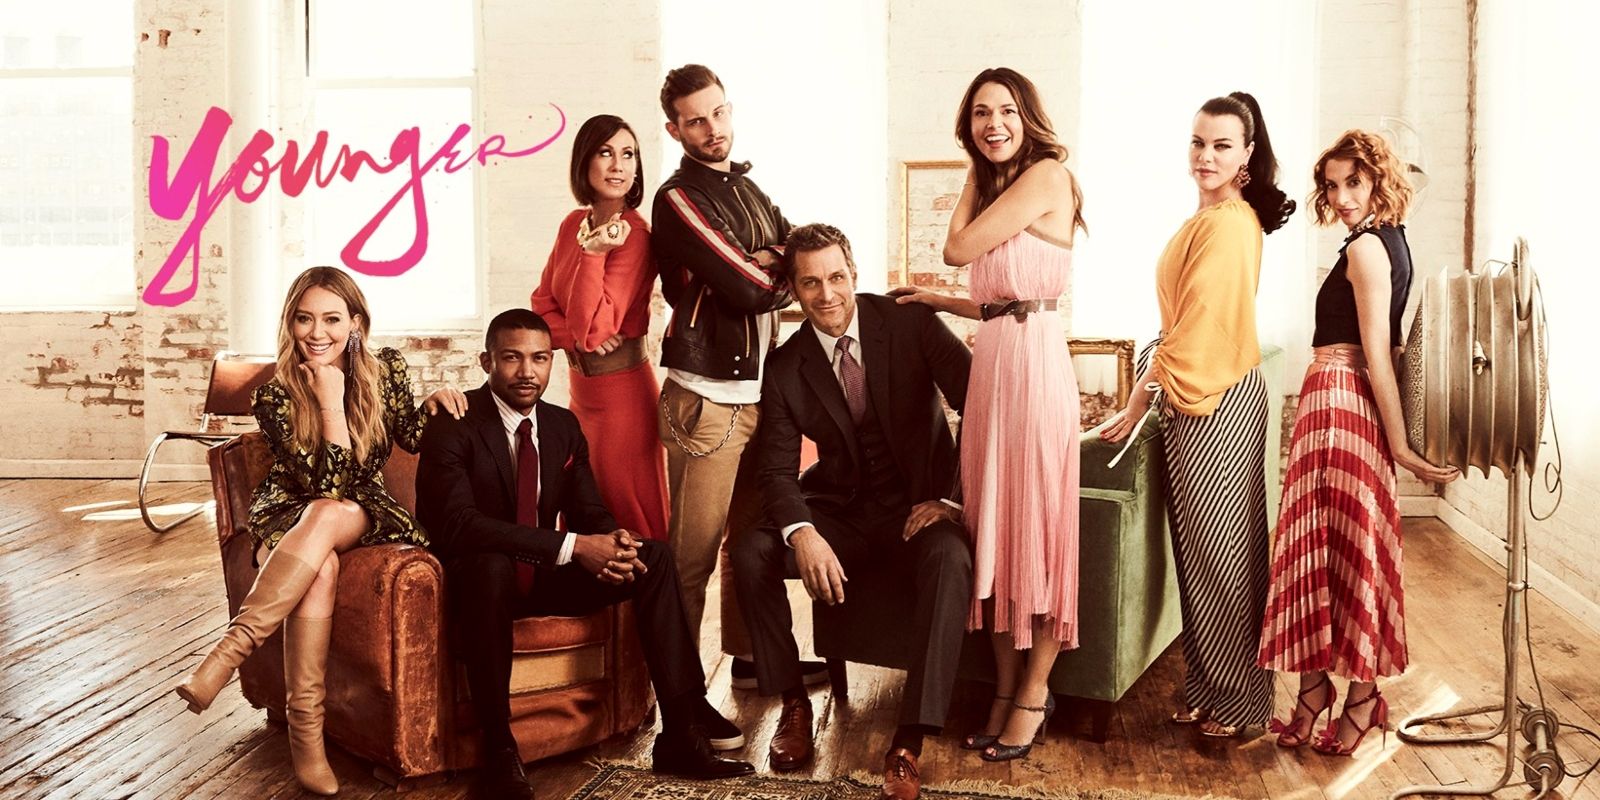 Younger full cast poster.